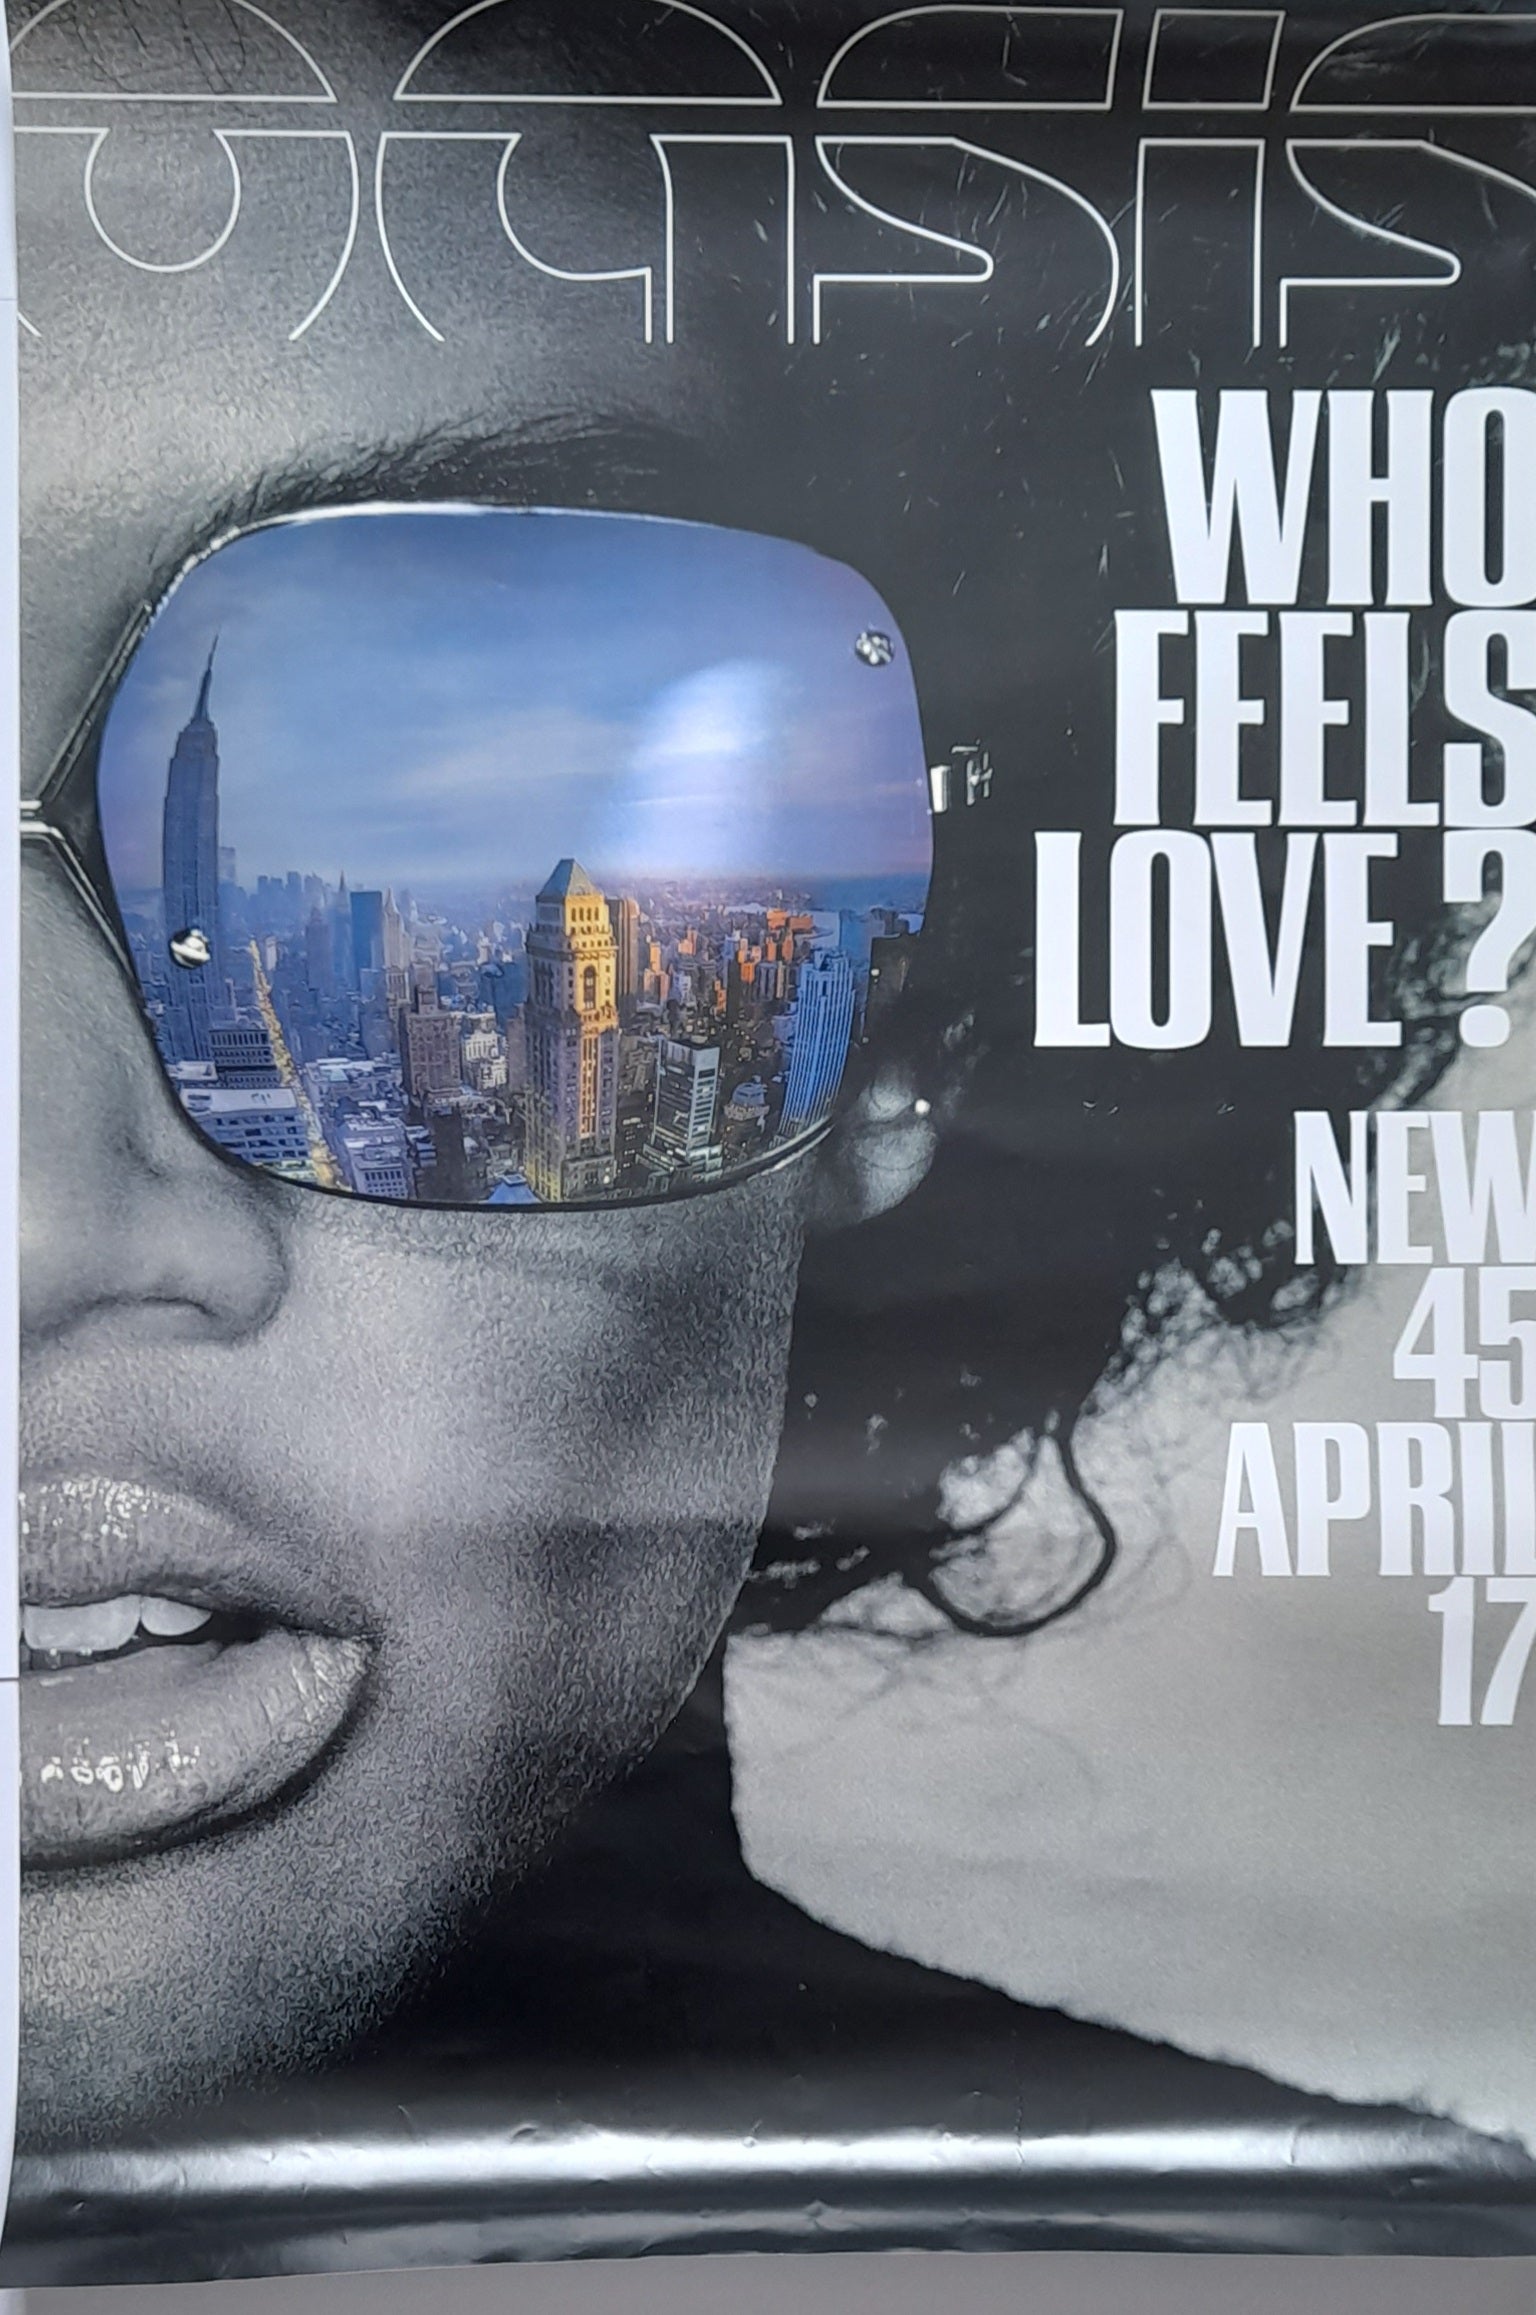 Oasis Who Feels Love? single Promotional Poster - RewindPressPlay